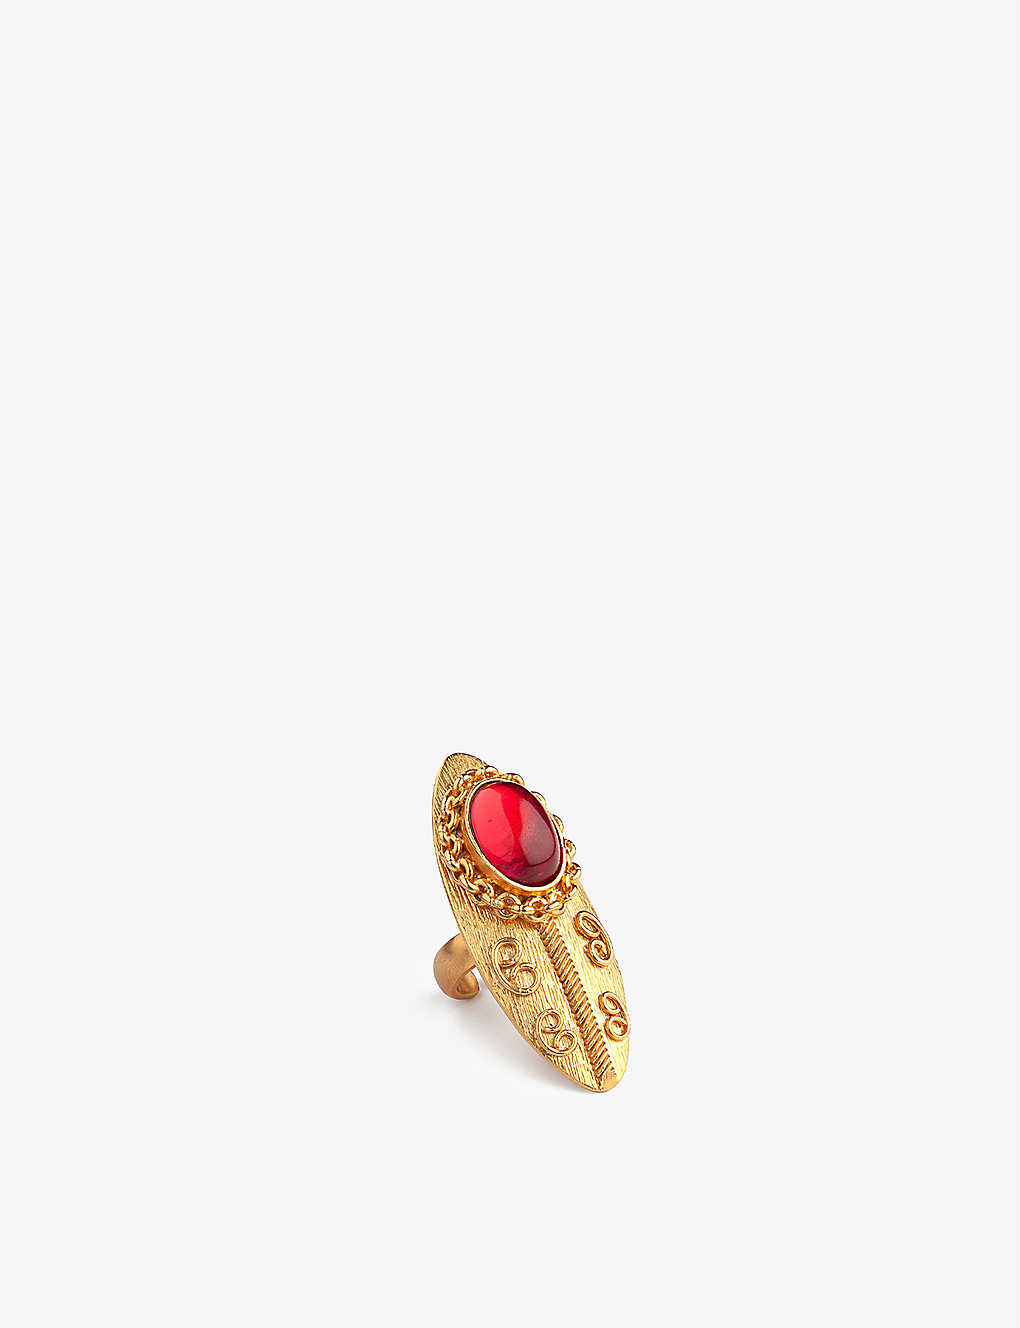 La Maison Couture Sonia Petroff 24ct Yellow-gold Plated Brass And Ruby Cabochon Ring